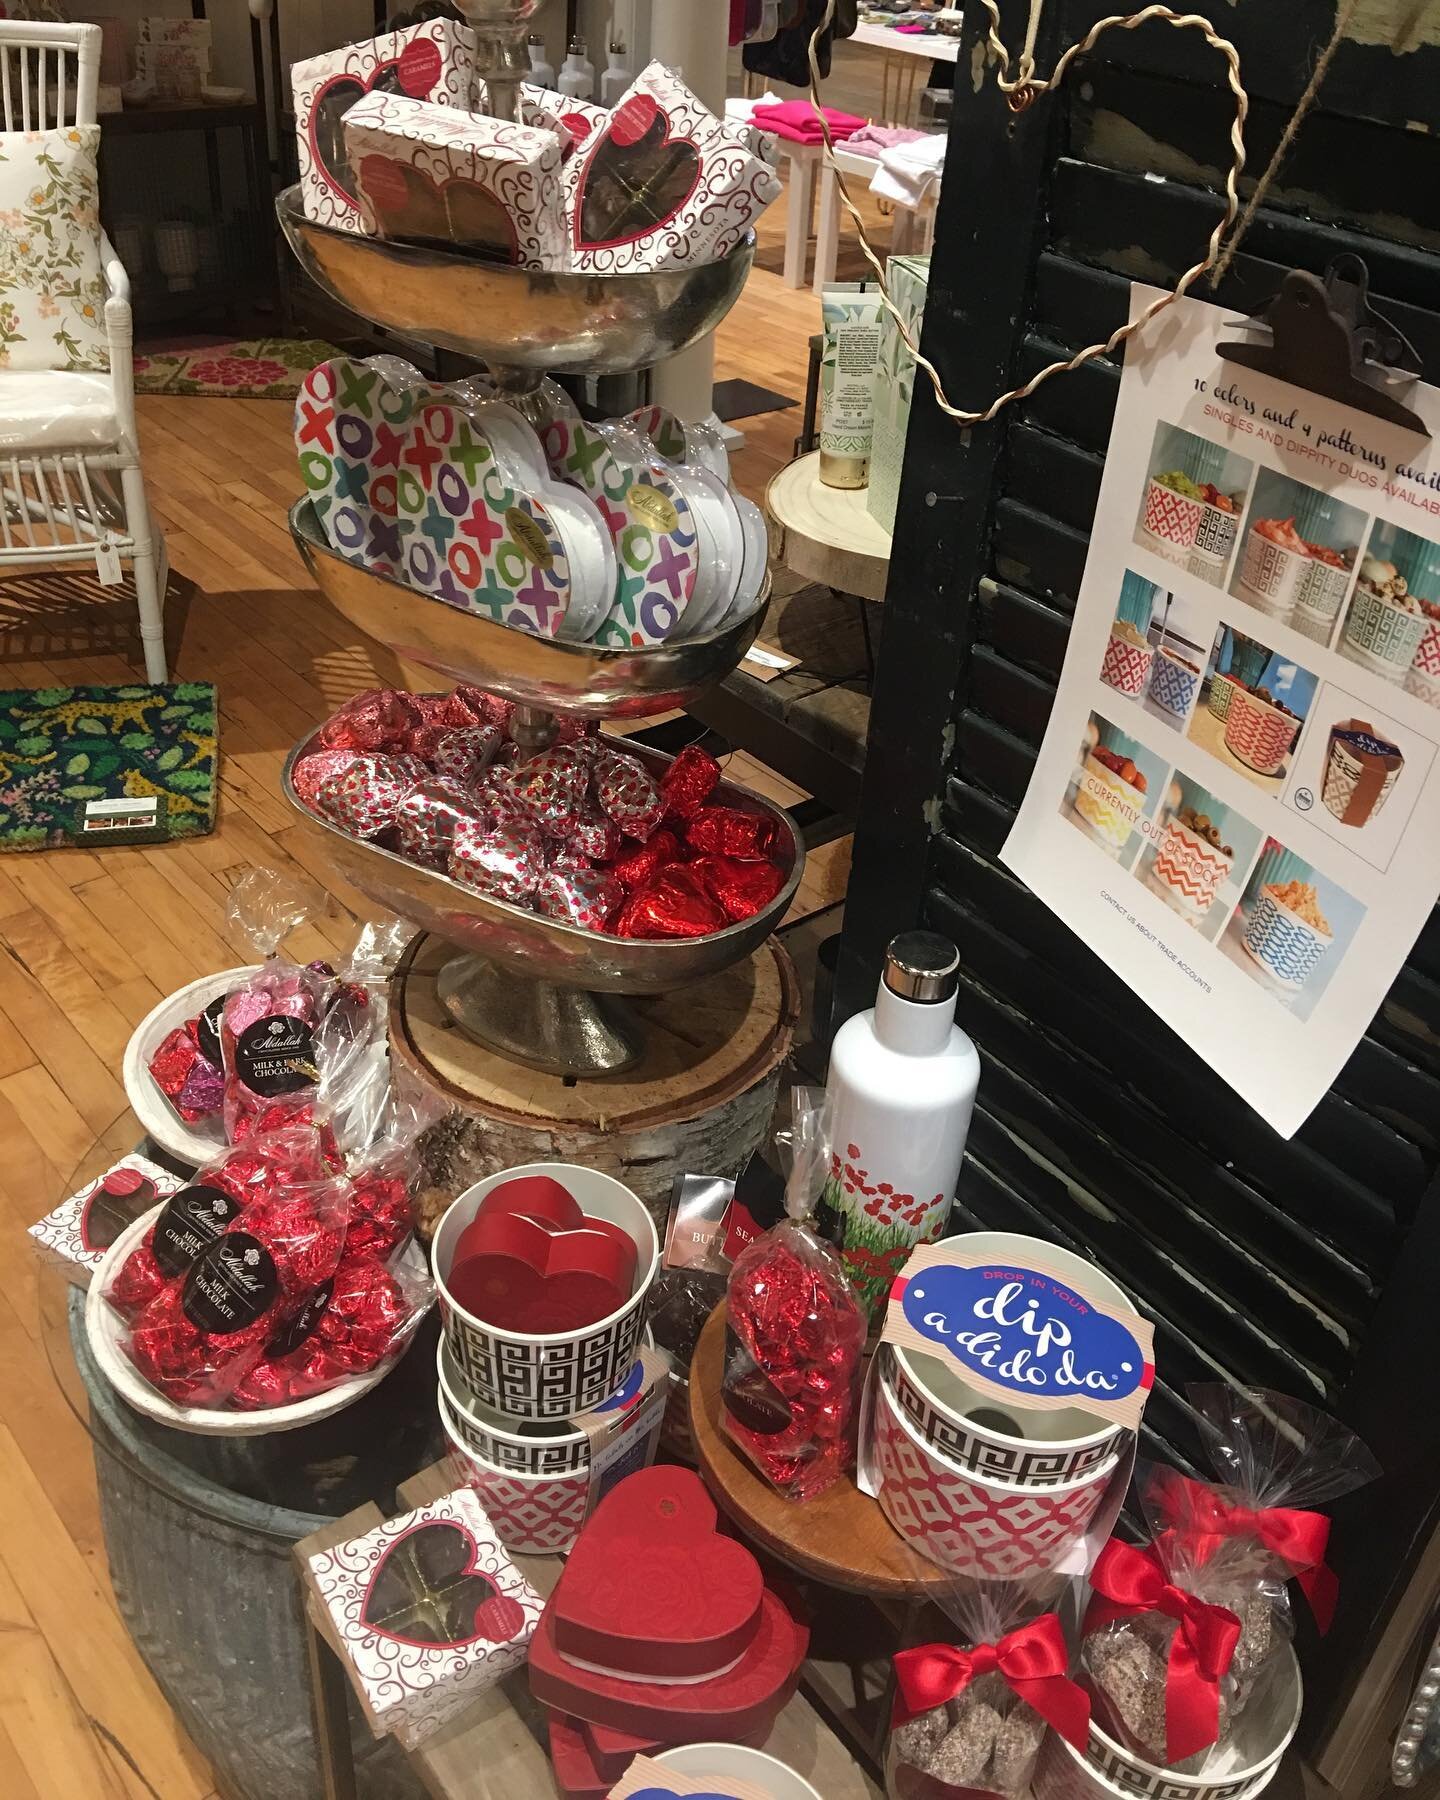 Grab the perfect Valentine&rsquo;s gift for your love, galpals, teachers, or family in Style Post!! New chocolates and candles with free gift wrapping will make your shopping easy!
.
.
.
.
#rva #shoprva #valentine #valentinesday #shopsmall #rvaexperi